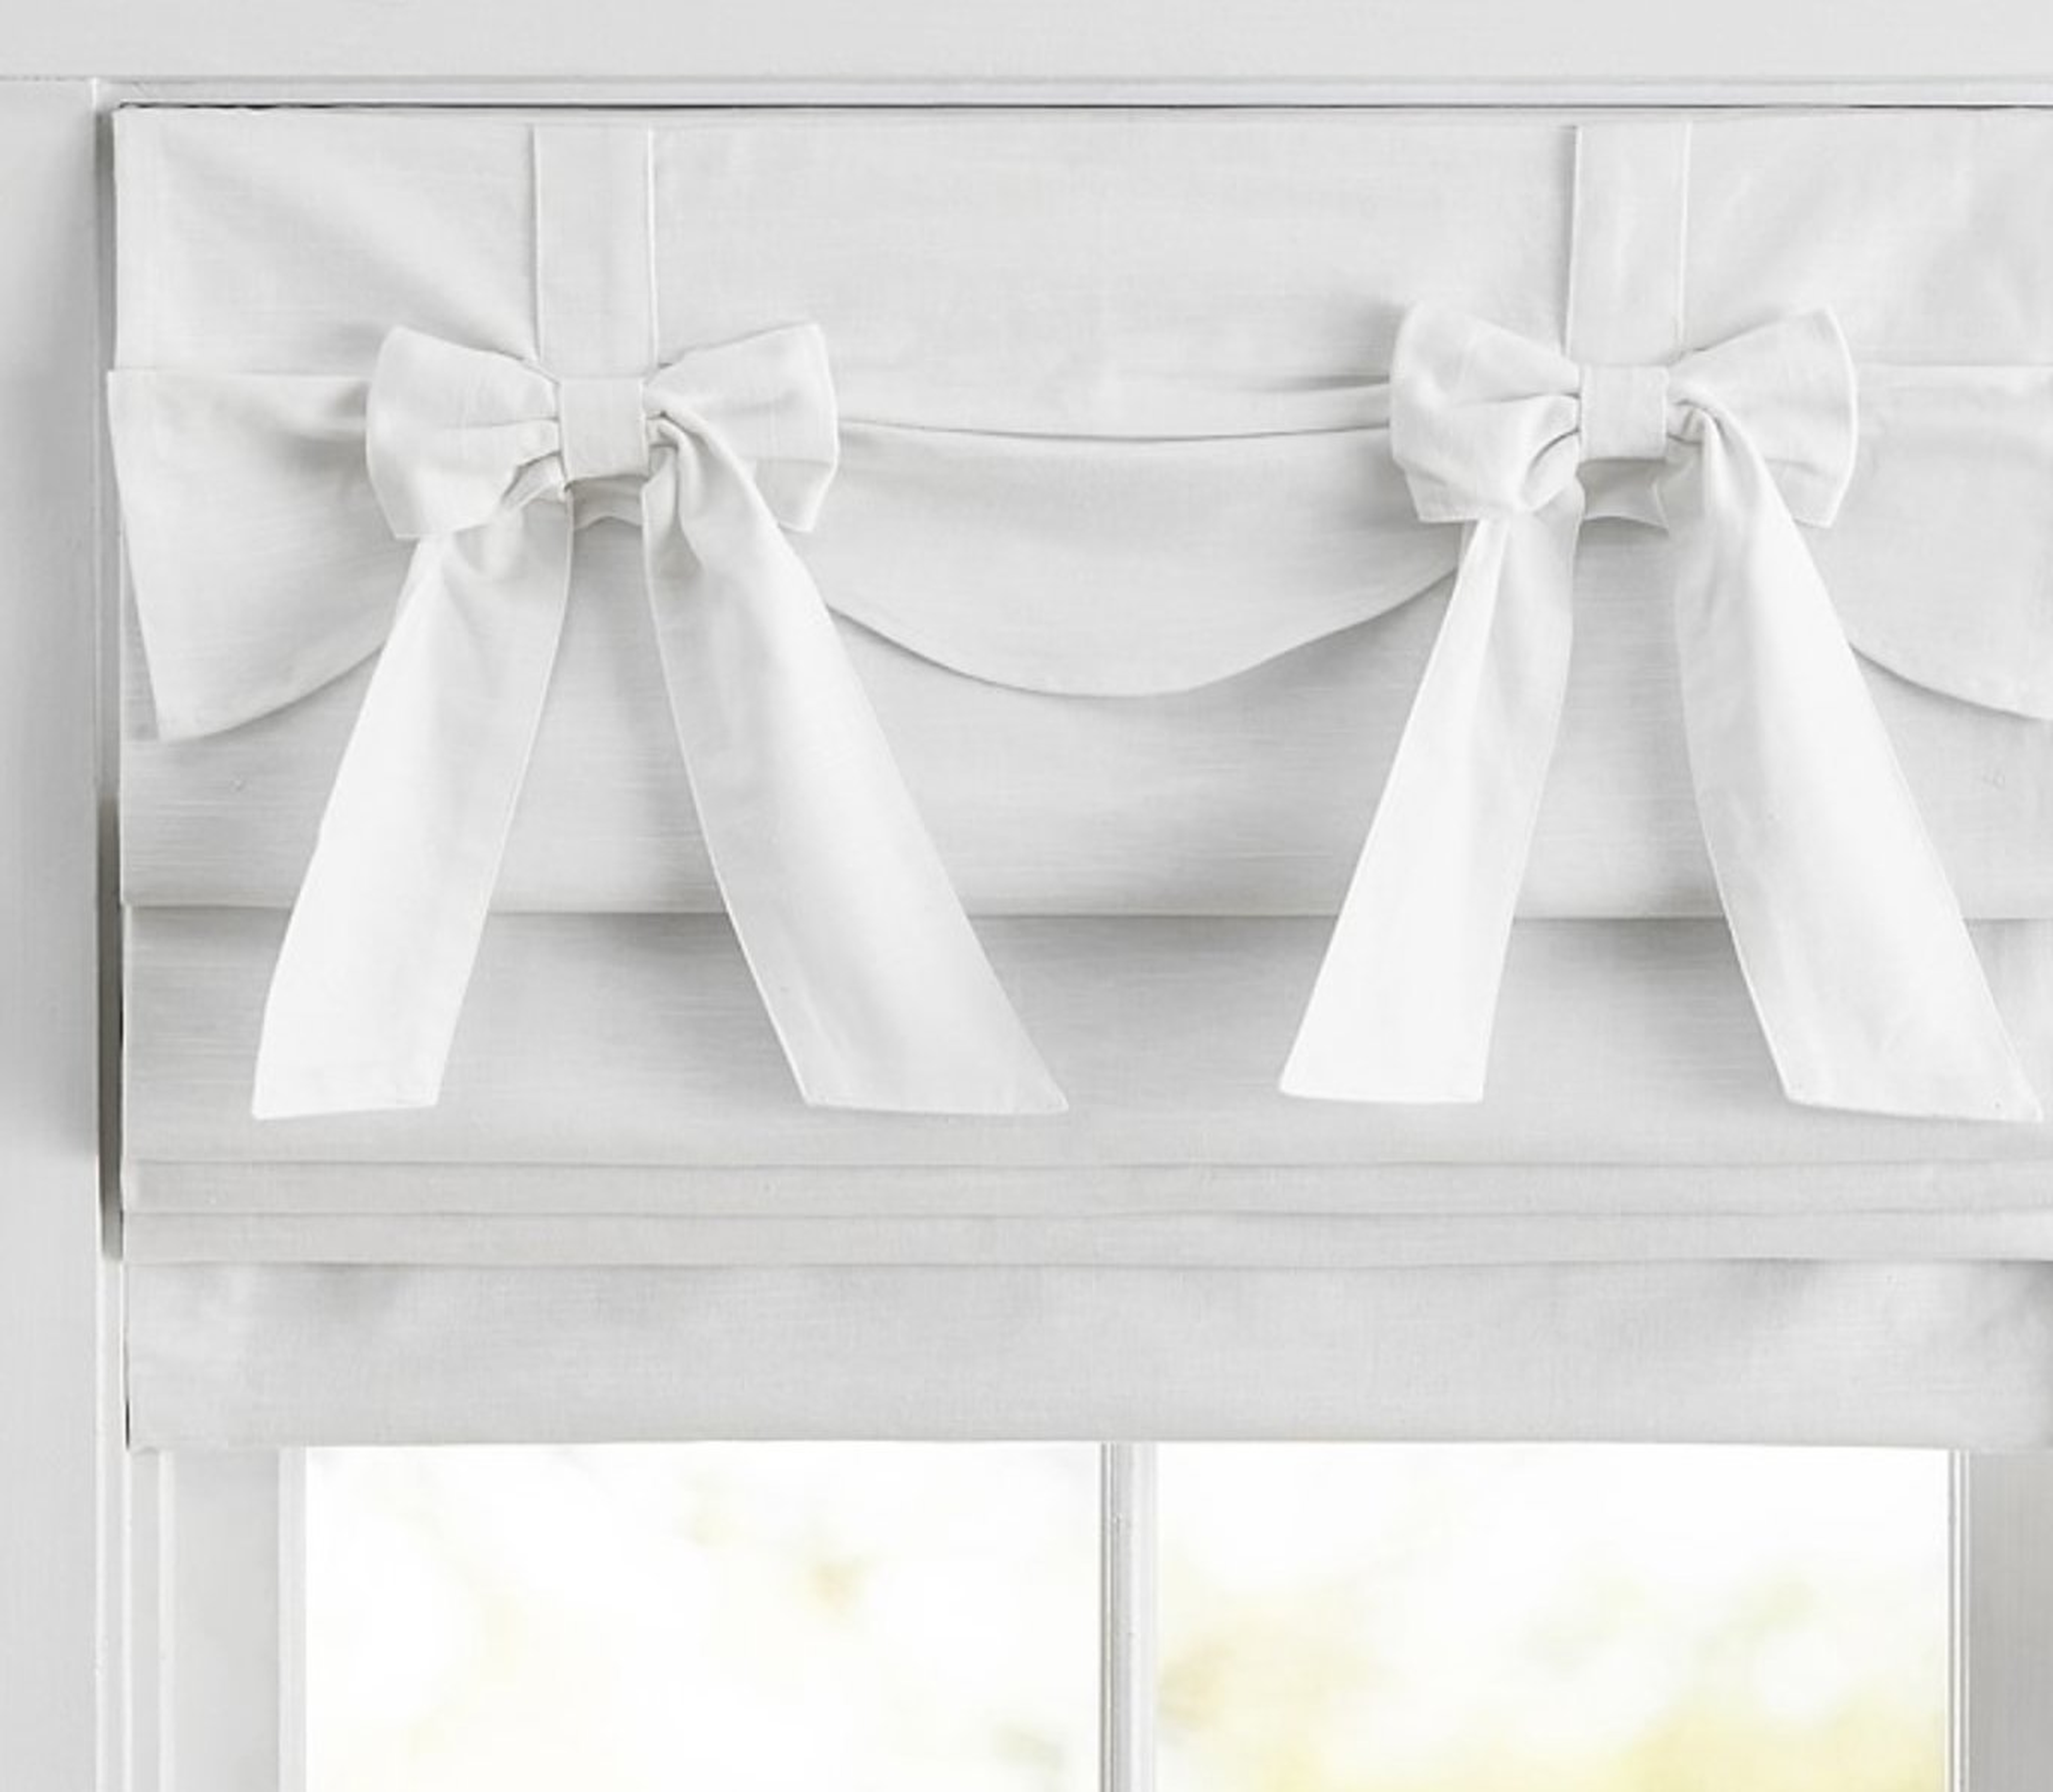 Evelyn Bow Valance Cordless Blackout Roman Shade 44x64 Inches - White - Pottery Barn Kids